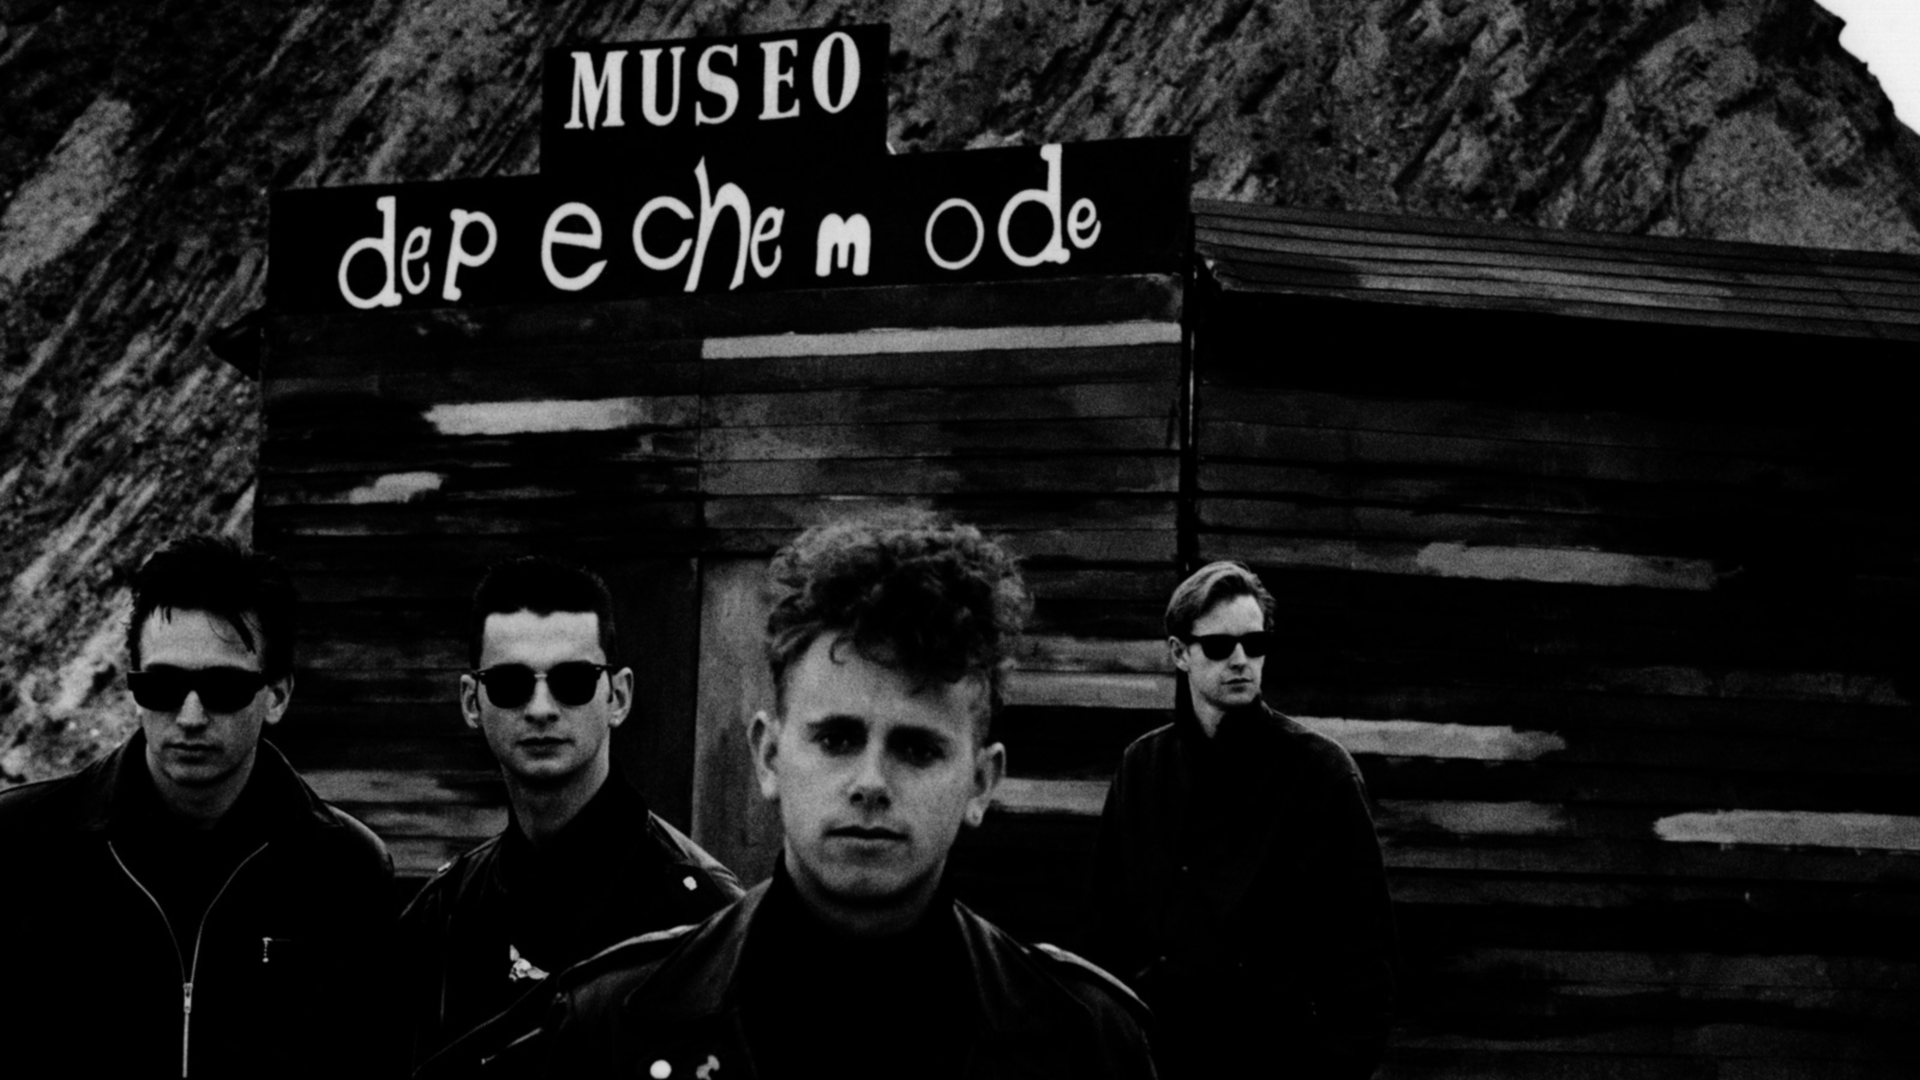 Depeche Mode HD Wallpaper And Photo download